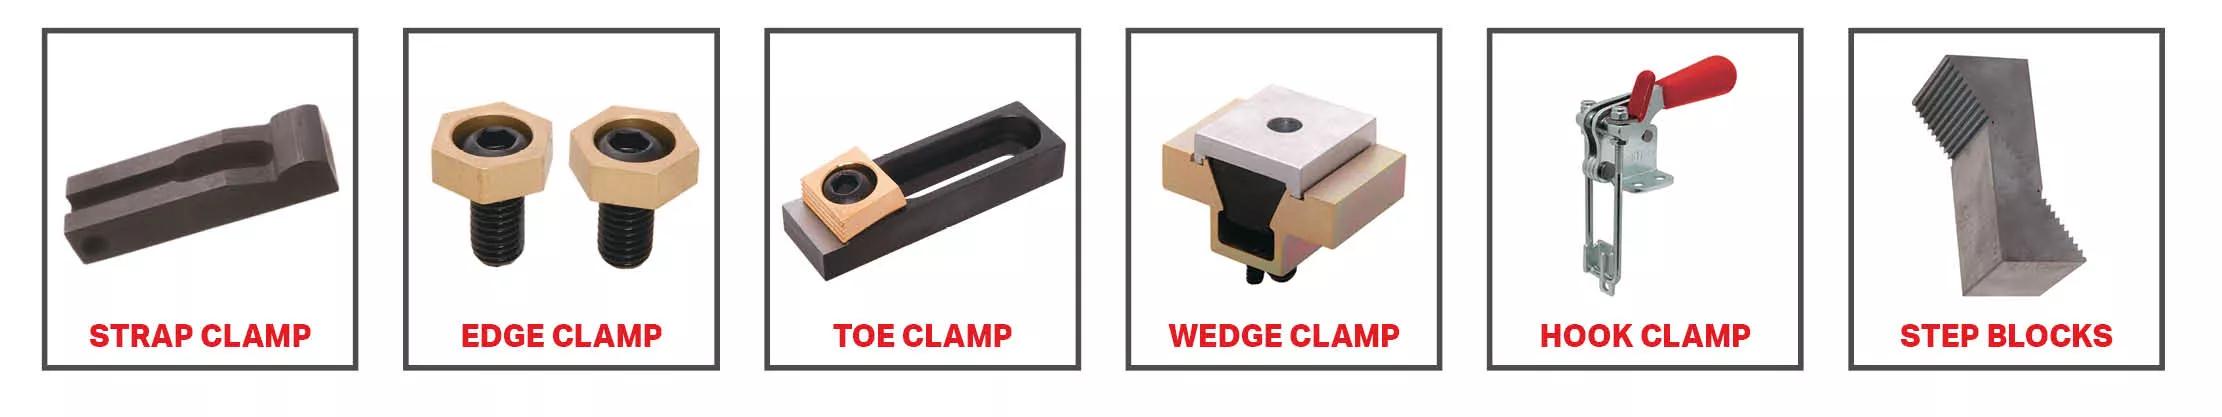 Clamping Solutions